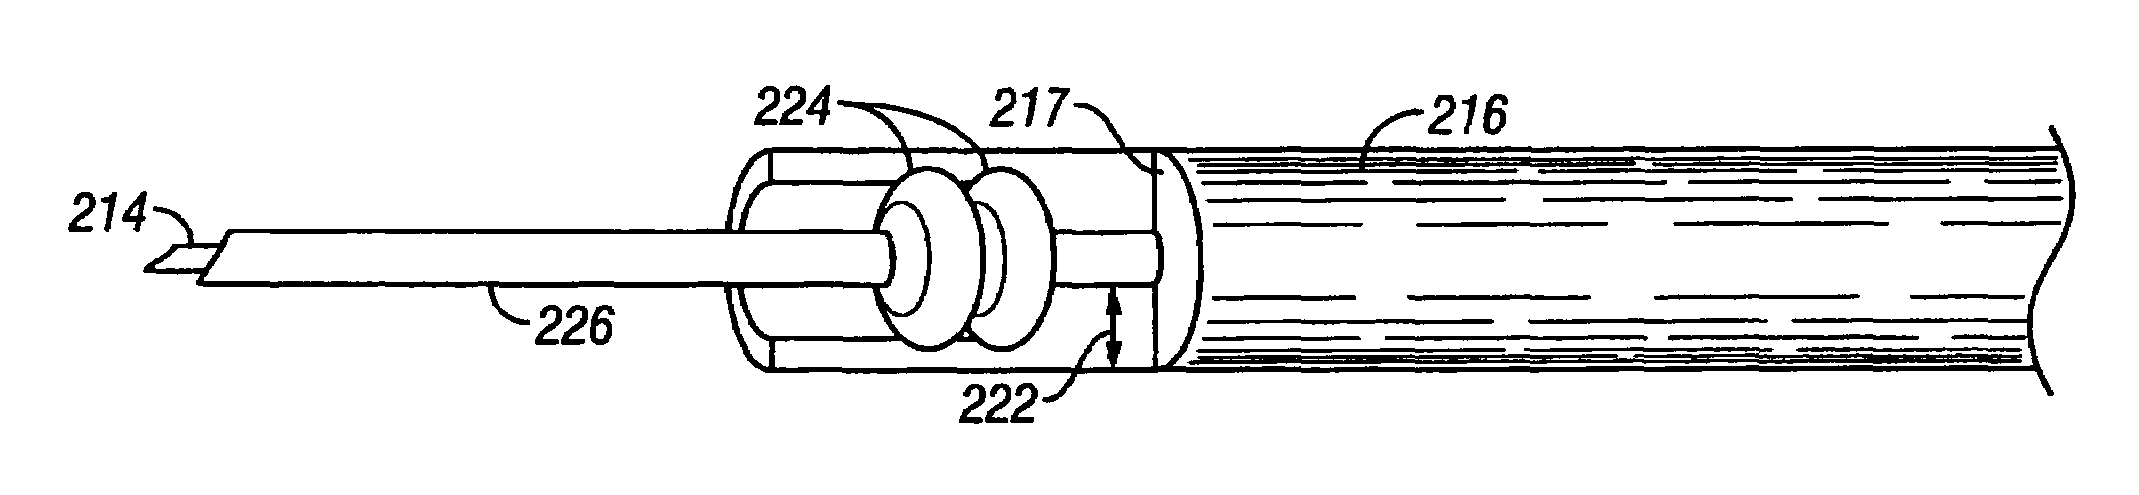 Surgical tool having electrocautery energy supply conductor with inhibited current leakage